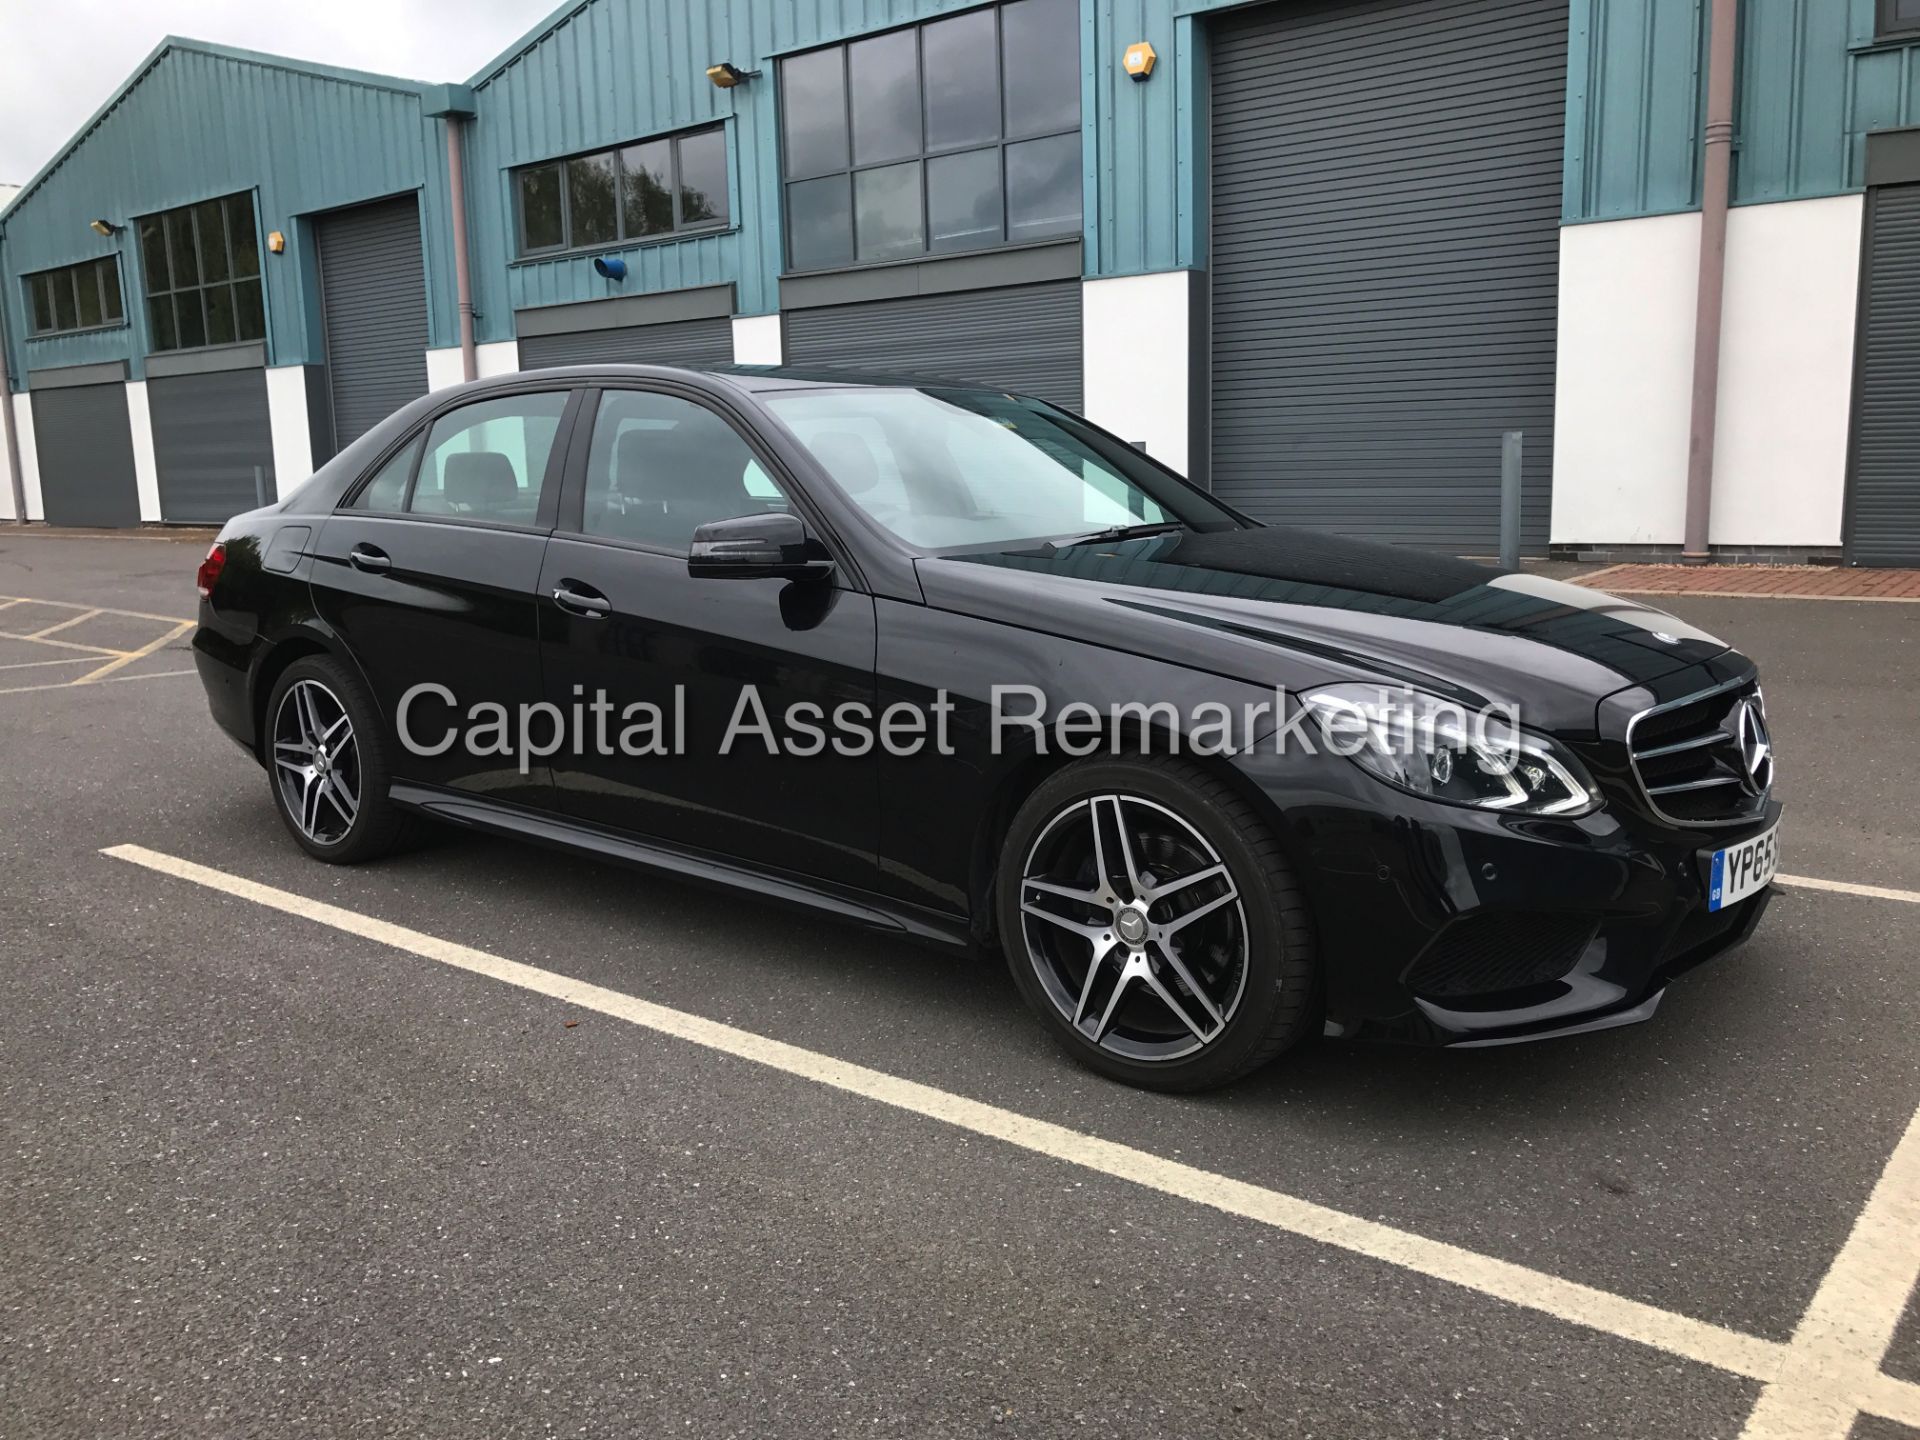 (On sale) MERCEDES-BENZ E220d 'AMG - NIGHT EDITION' (2016 MODEL) '7-G TRONIC - - SAT NAV' (1 OWNER)